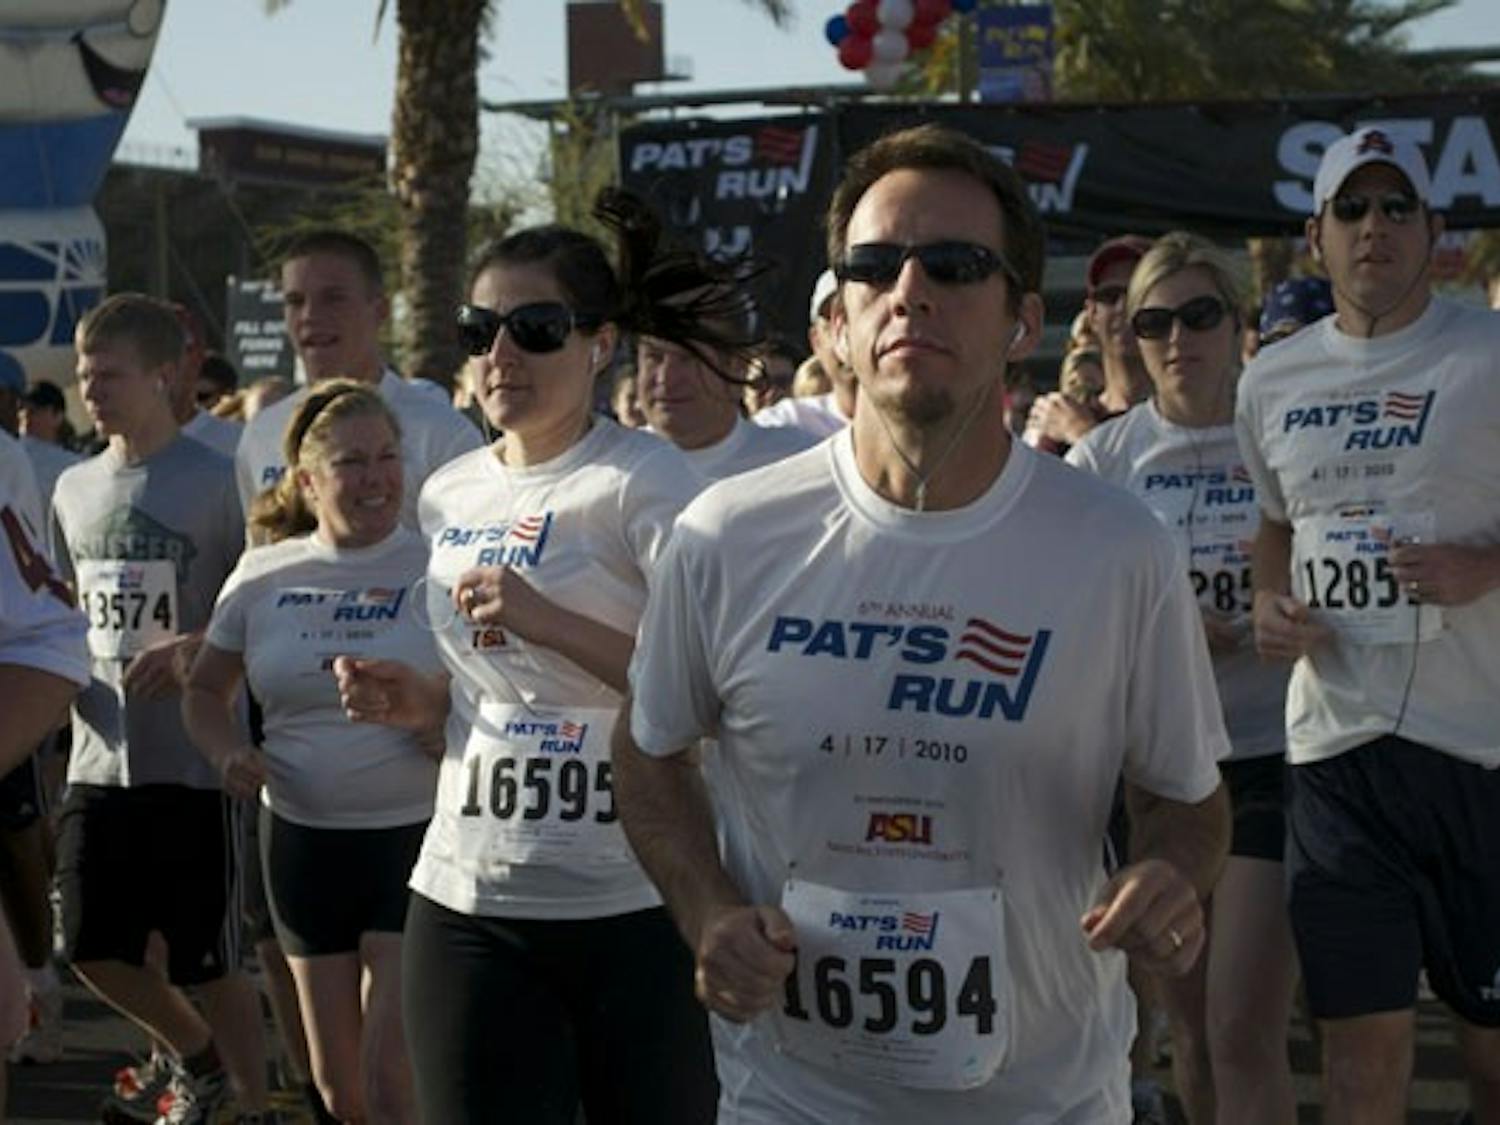 HONORING NO. 40: Runners decked out in their "6th Anuual Pat's Run" T-shirts start the 4.2 mile Run/Walk on the ASU campus Saturday morning. (Photo by Molly Smith)